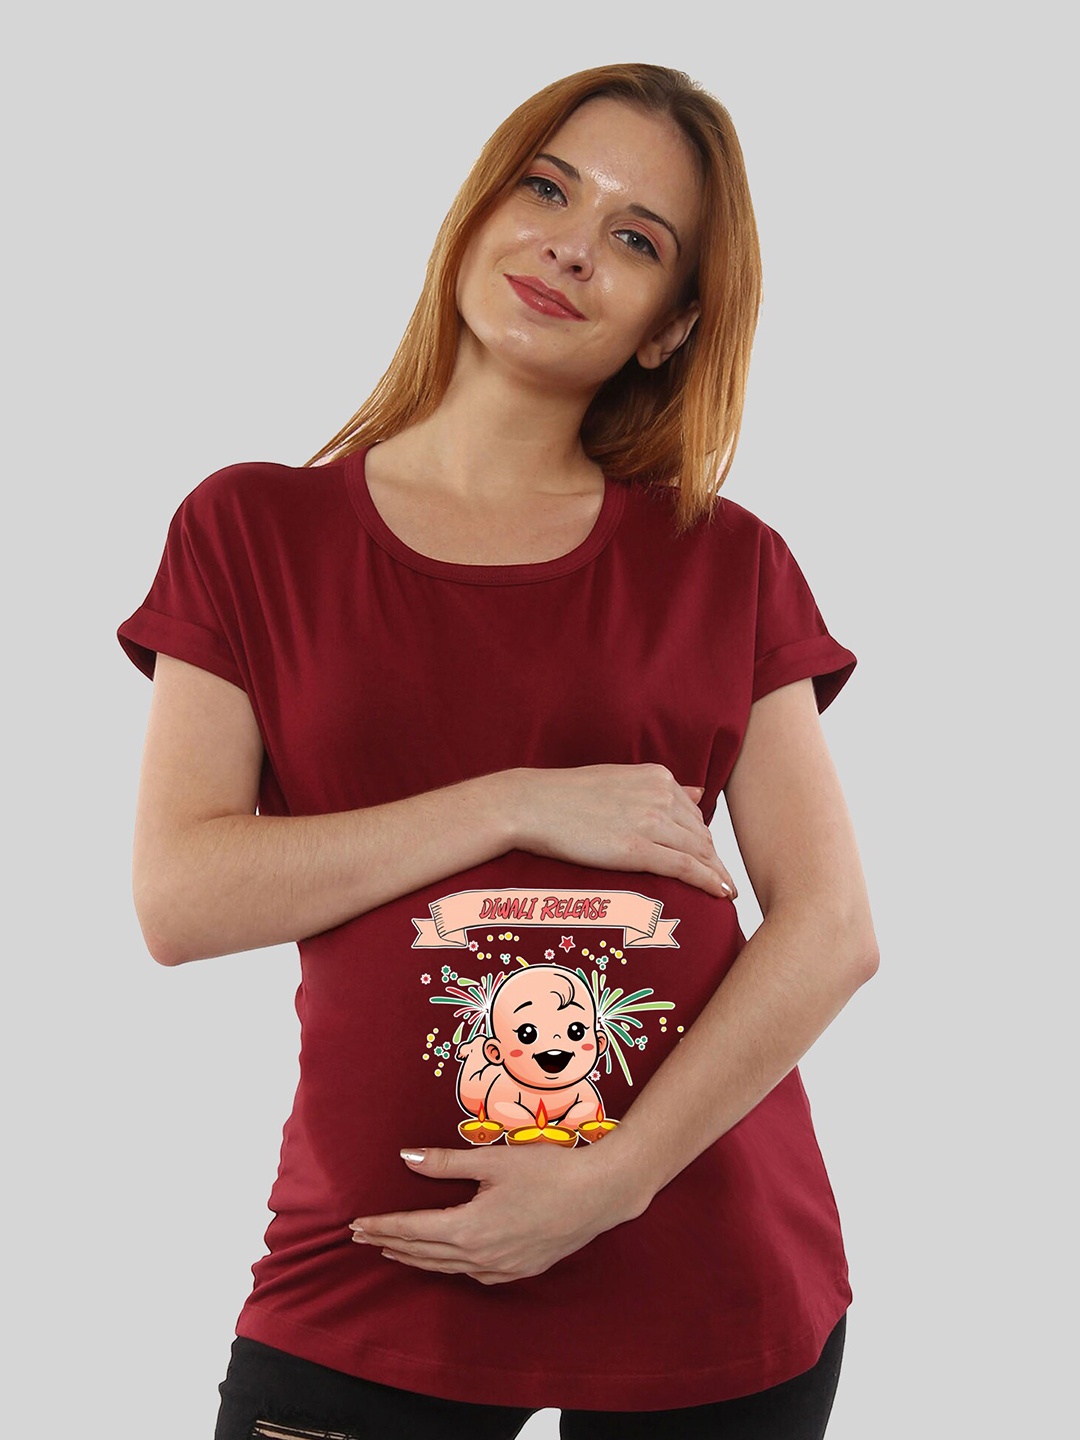 

SillyBoom Graphic Printed Extended Sleeves Cotton Maternity T-shirt, Maroon